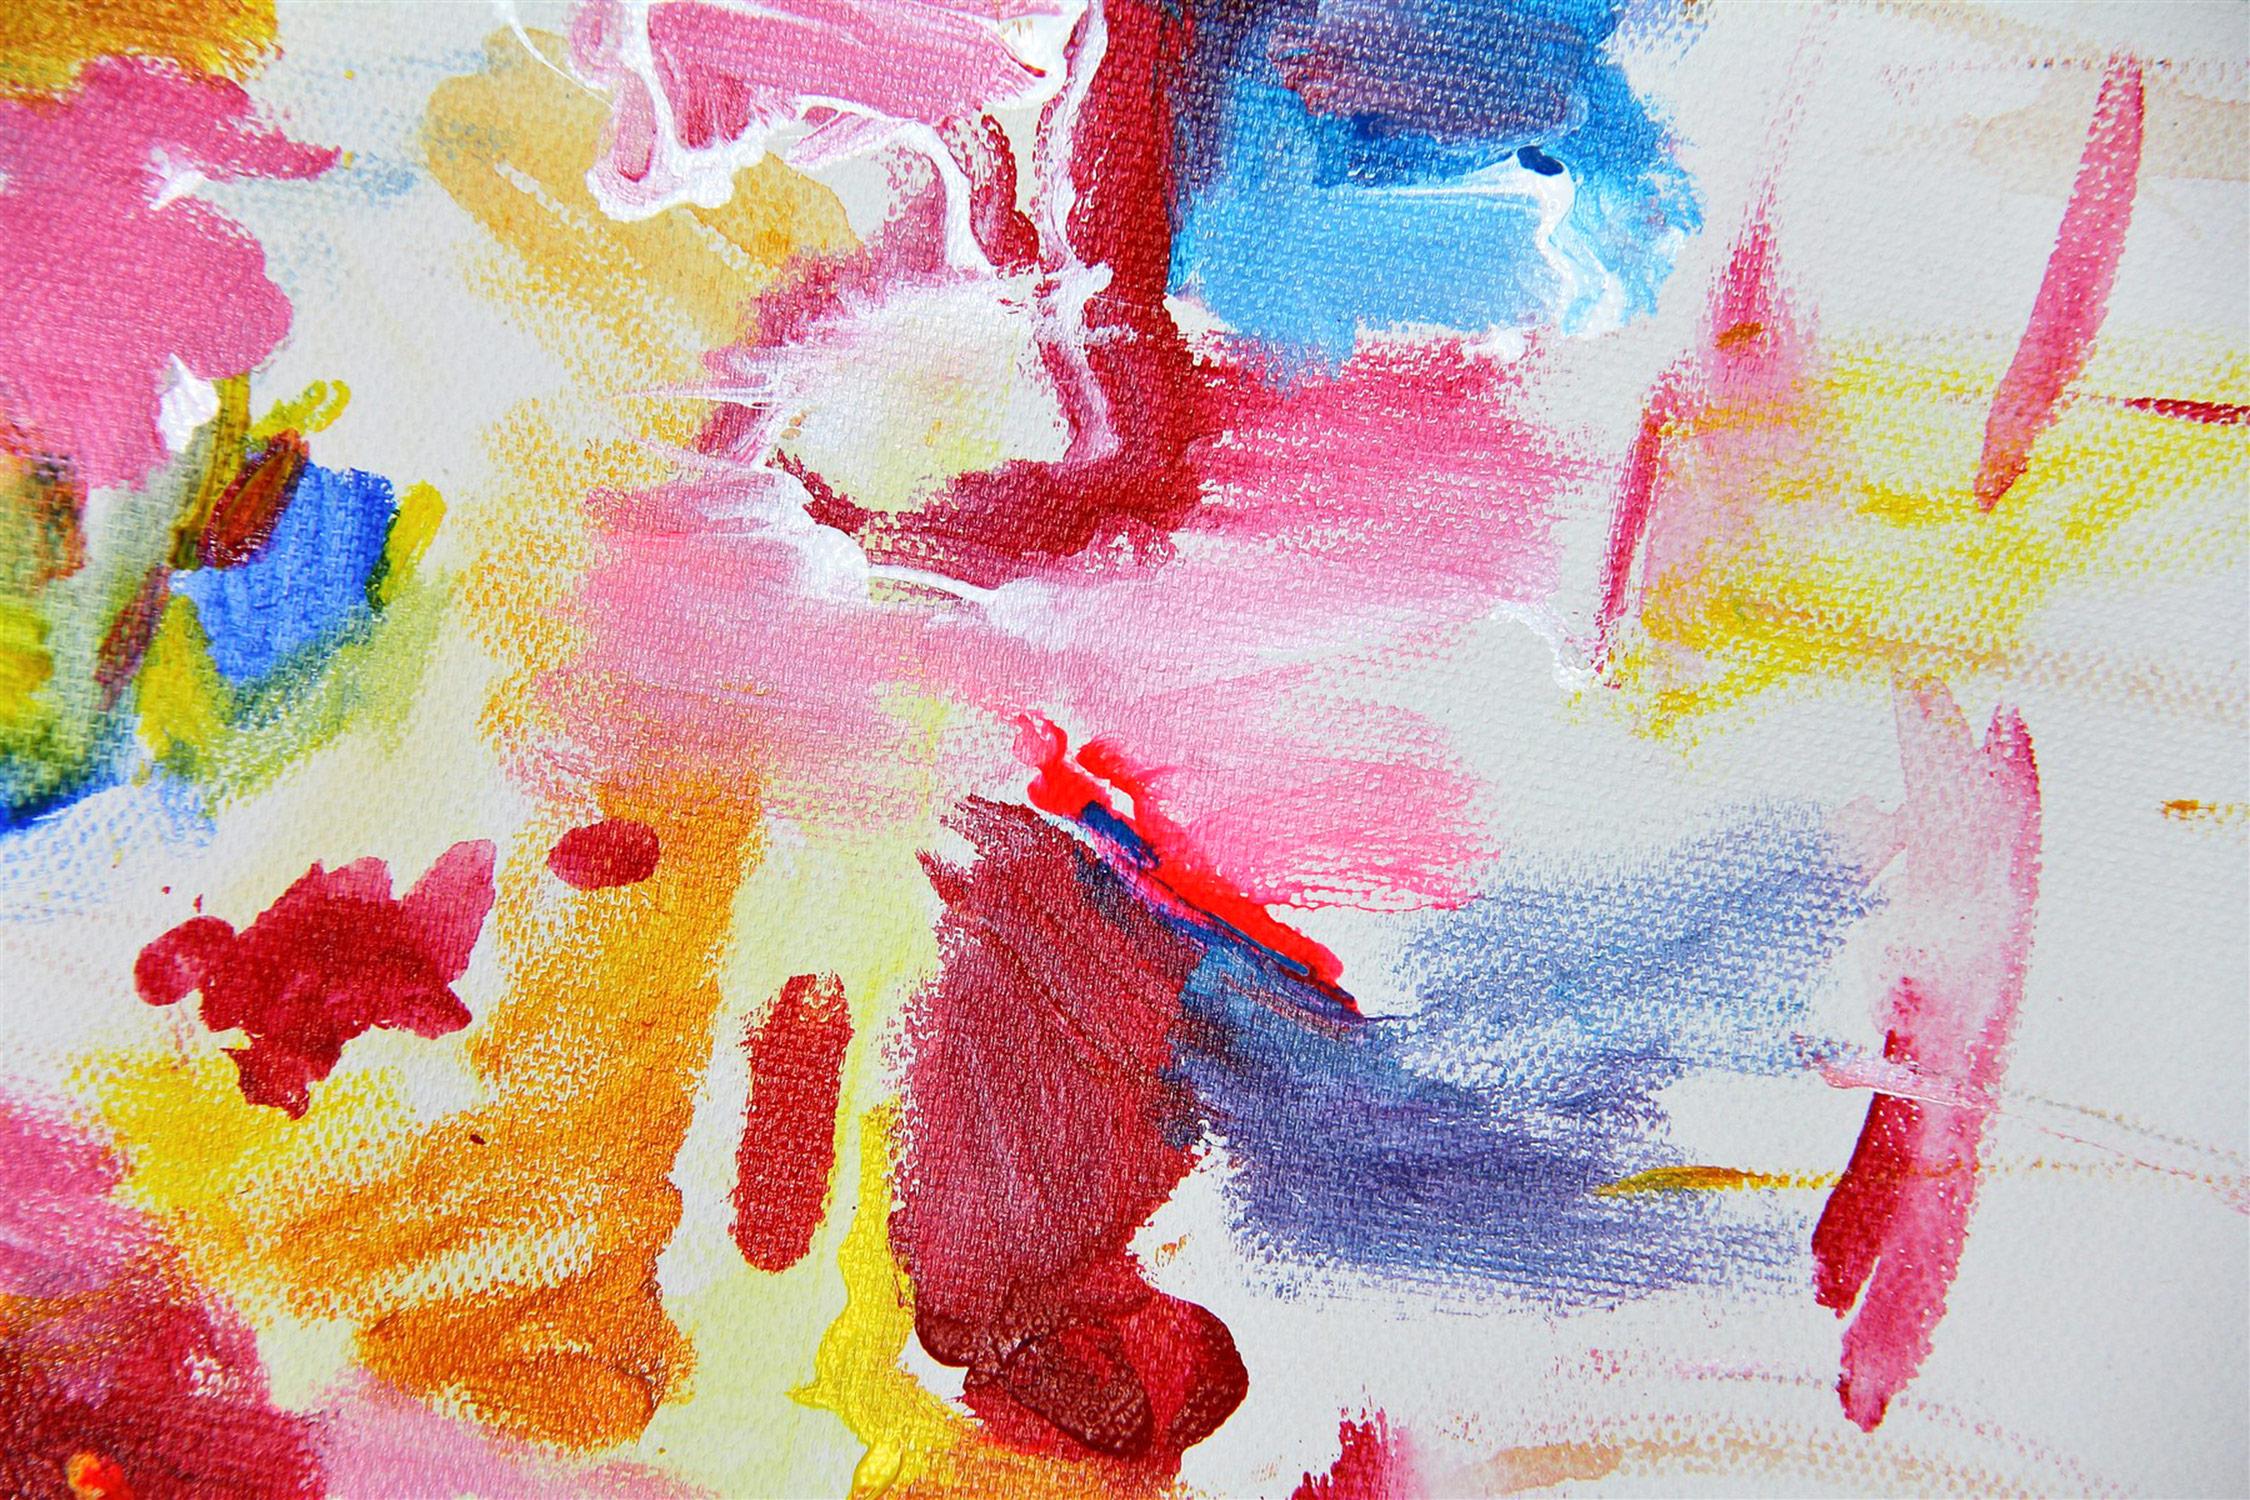 Patience, Kindness And Love, Abstract Expressionistic Painting 1